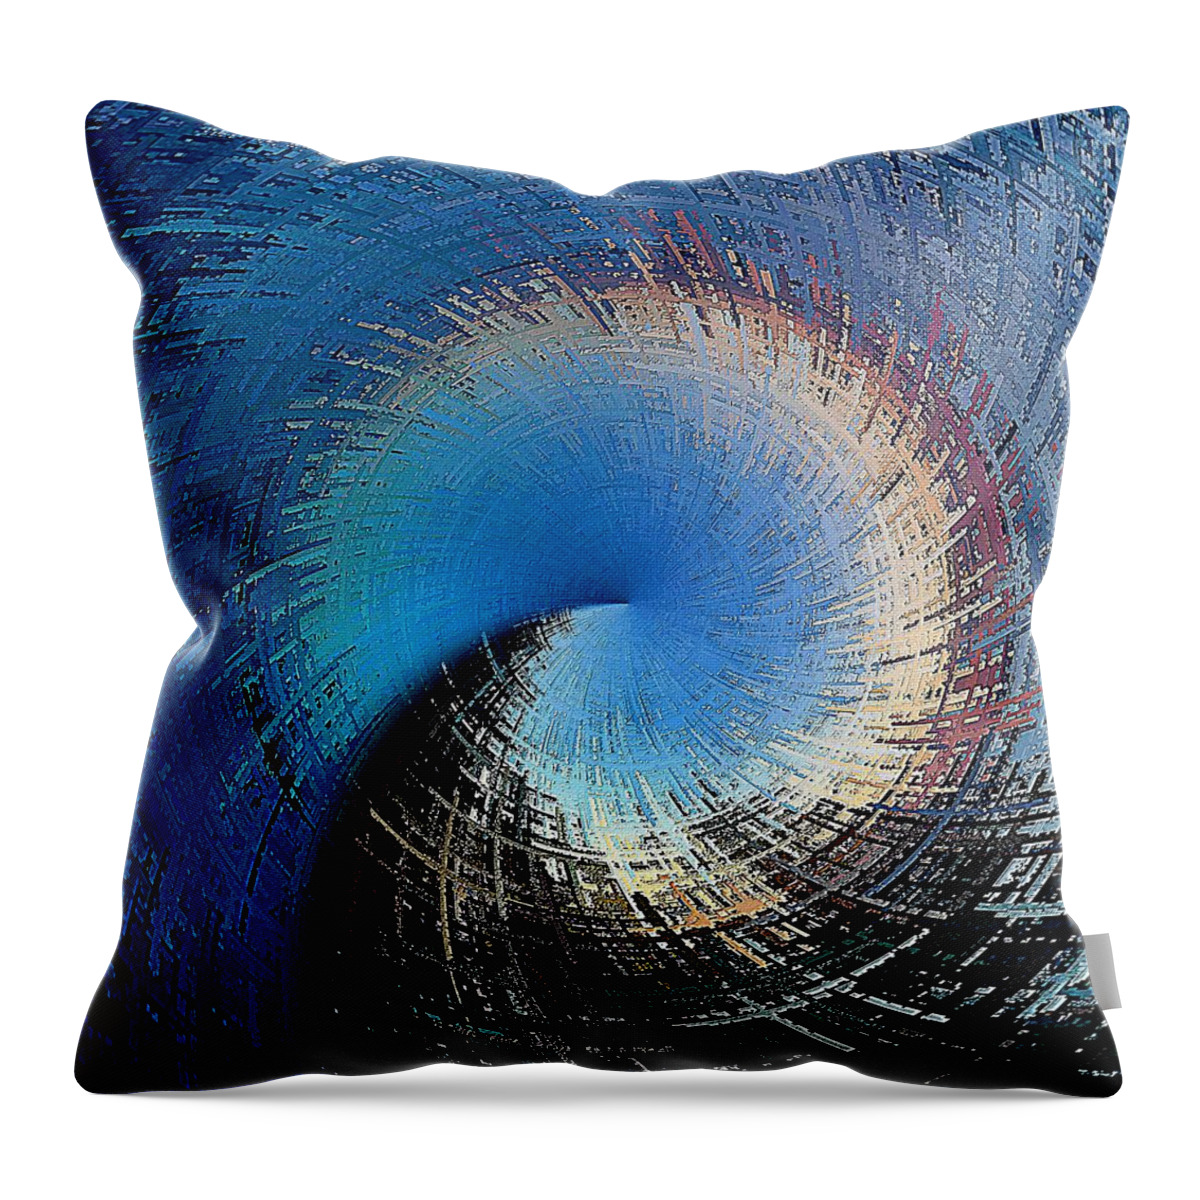 Blue Throw Pillow featuring the digital art A Passage of Time by David Manlove